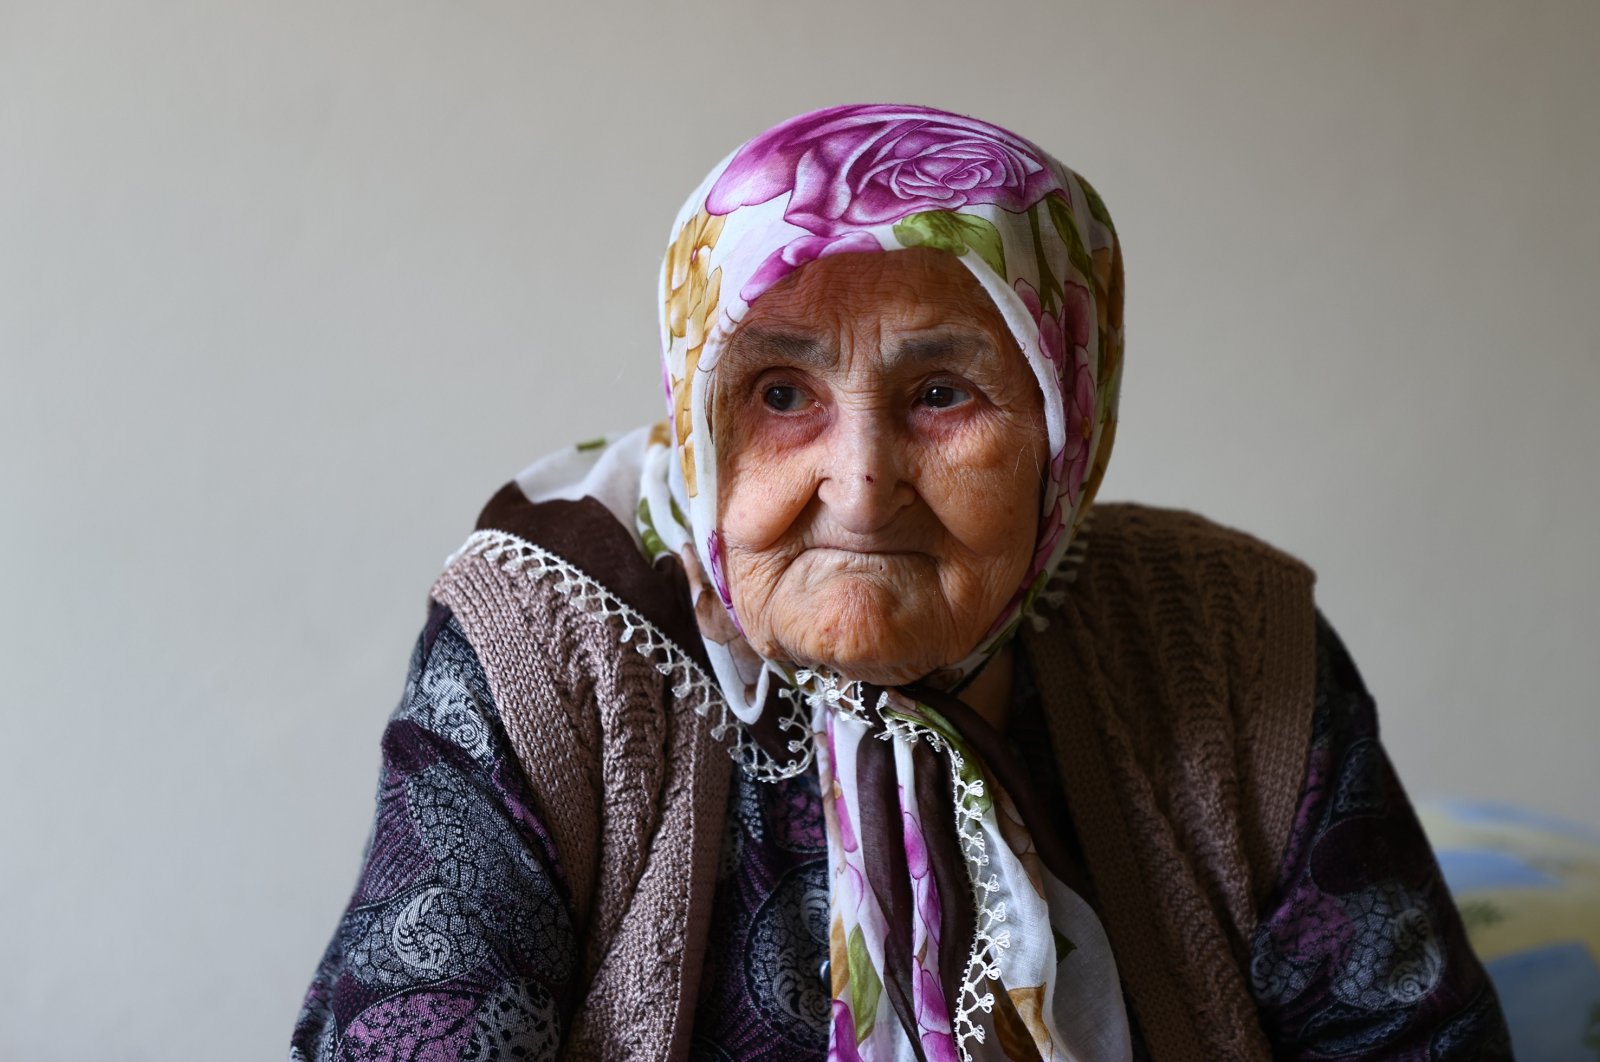 106-year-old Safiye Pehlivan listens during an interview at her home in Edirne, Turkey, March 23, 2021. (AA Photo)